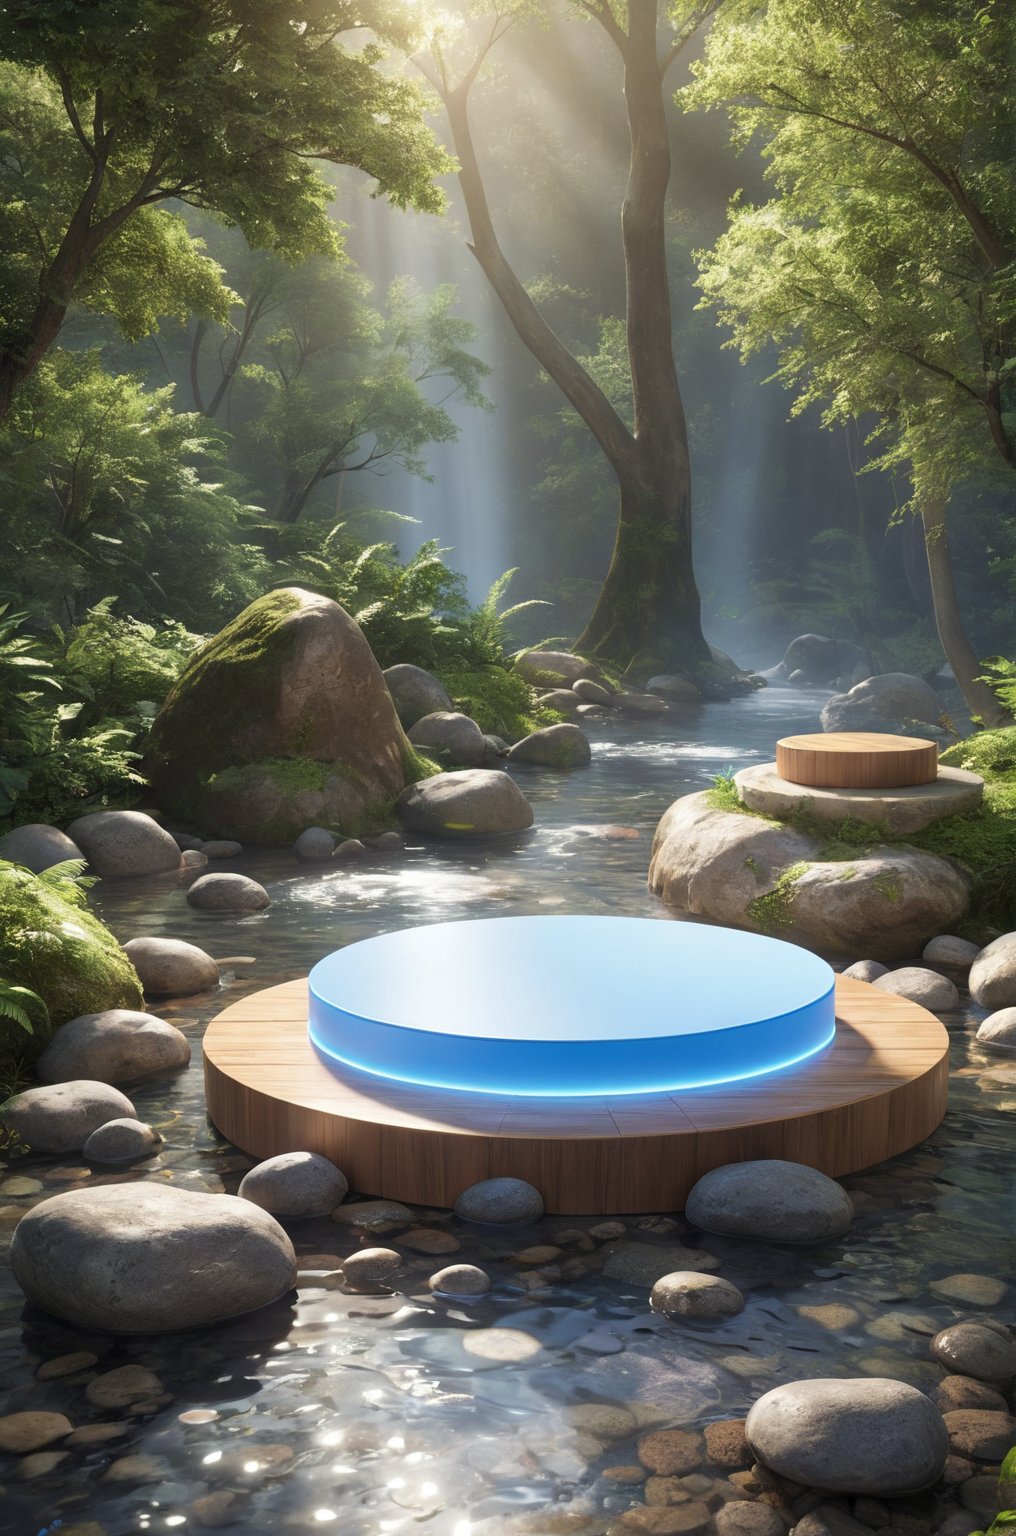 3D\(hubgstyle)\,
a round podium on a rock in a stream in the water in the middle, trees, rocks, water, 

professional 3d model, anime artwork pixar, 3d style, good shine, OC rendering, highly detailed, volumetric, dramatic lighting, 